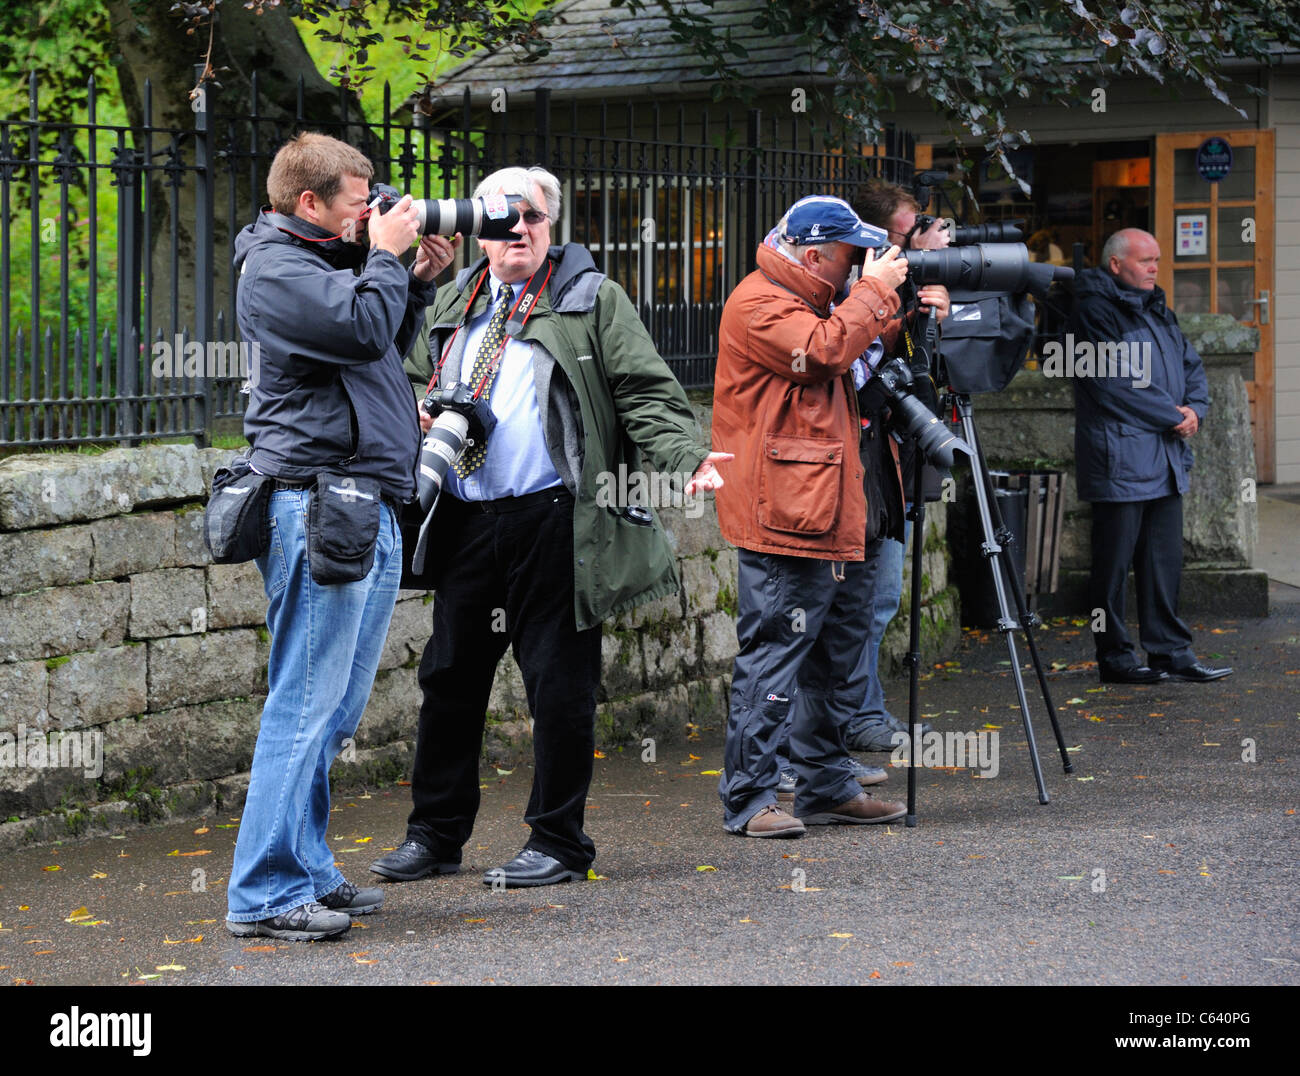 Paparazzi waiting for the Queen at Balmoral. Royal Deeside, Aberdeenshire, Scotland, United Kingdom, Europe. Stock Photo